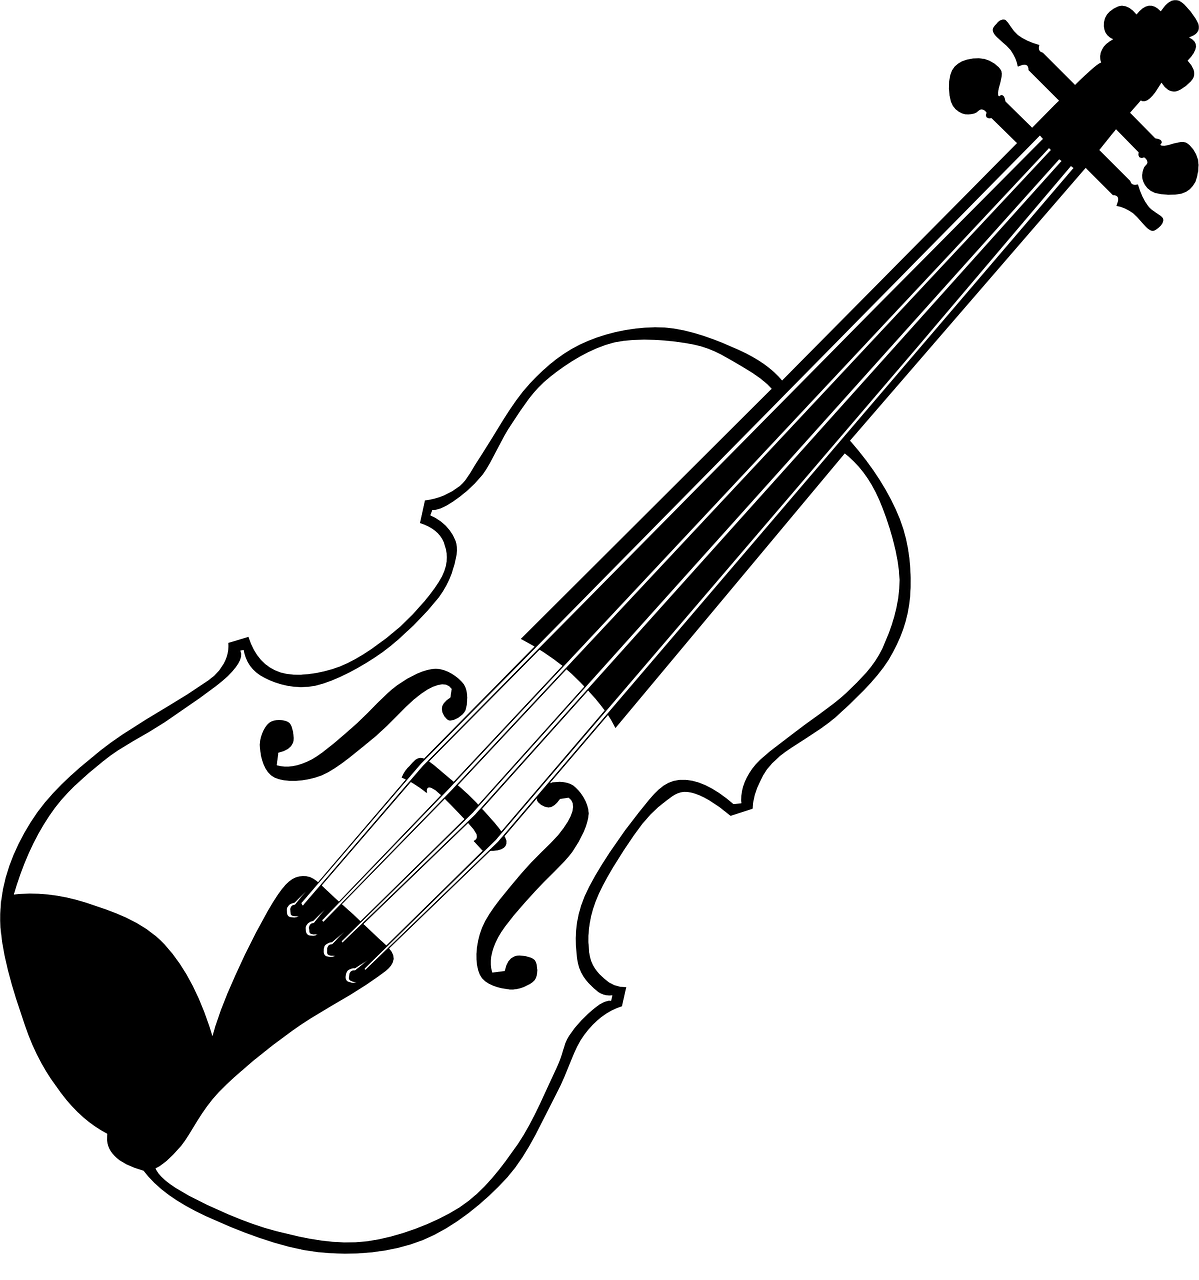 Classical Music Instrument PNG Image File